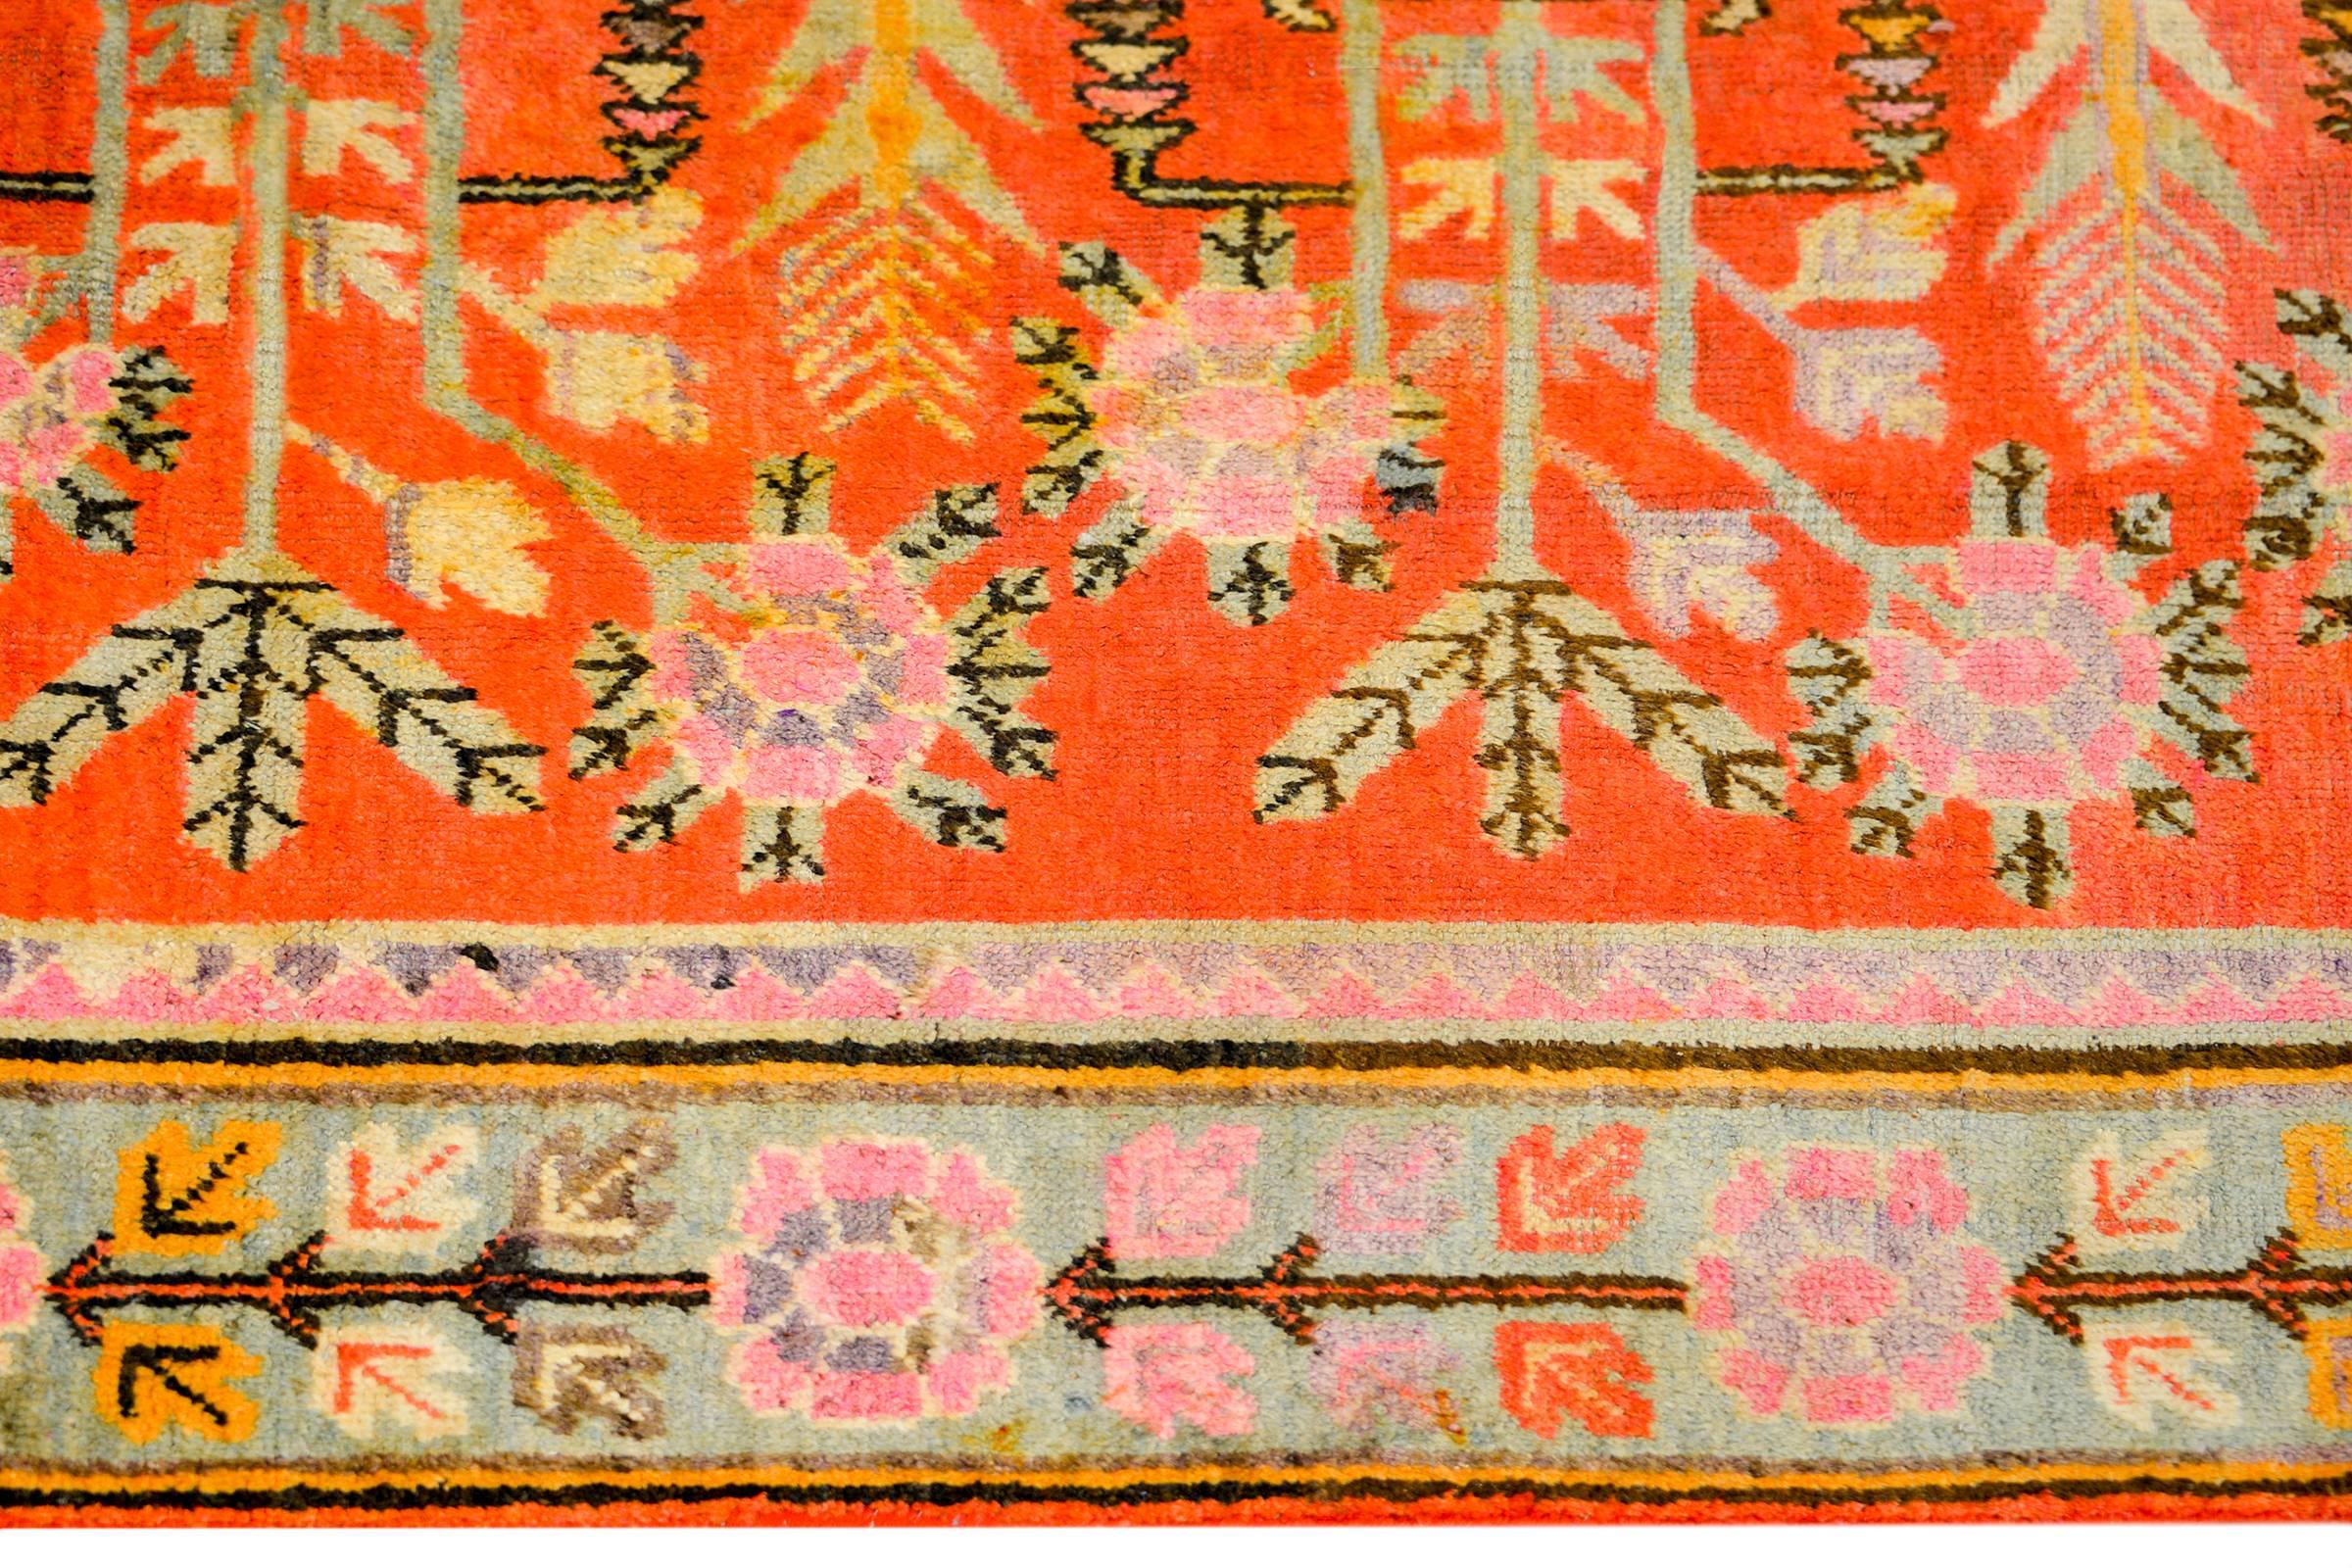 A wonderful early 20th century Central Asian pictorial Khotan rug with six large-scale Chinese-style vases potted with auspicious peony blossoms, and woven in multicolored vegetable dyed wool. The border is fantastic with a stylized large-scale